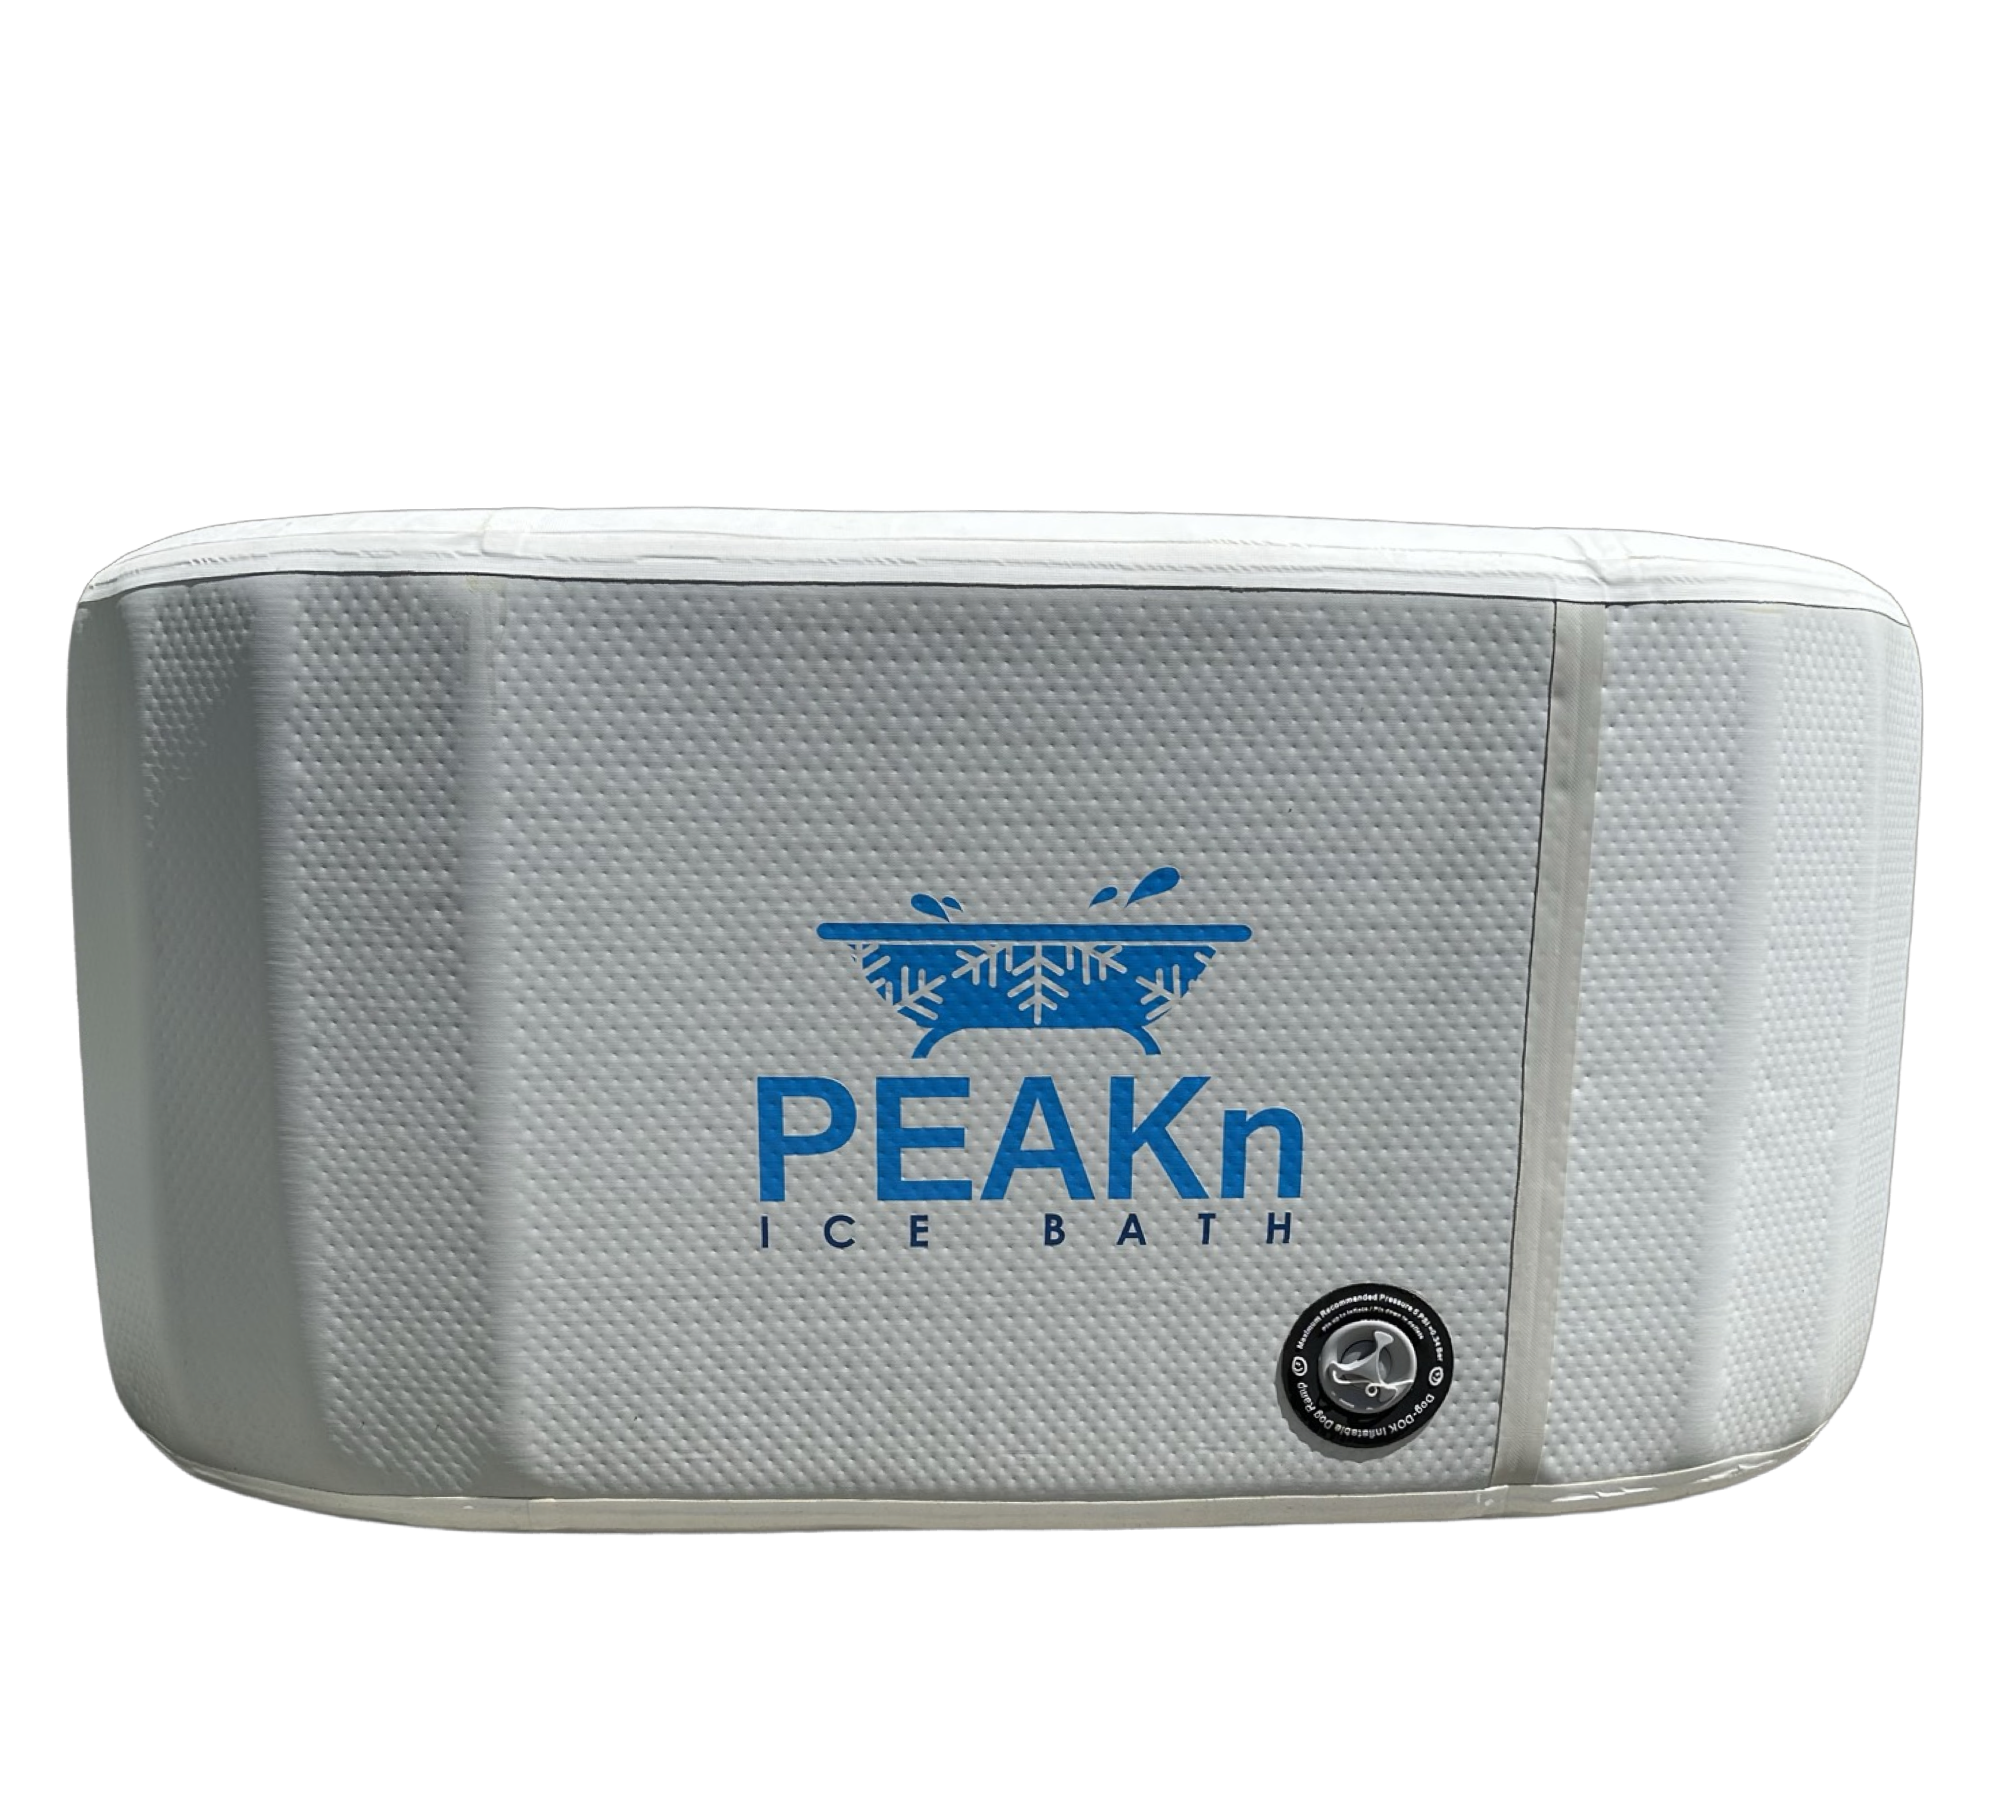 peakn ice bath insulated side view